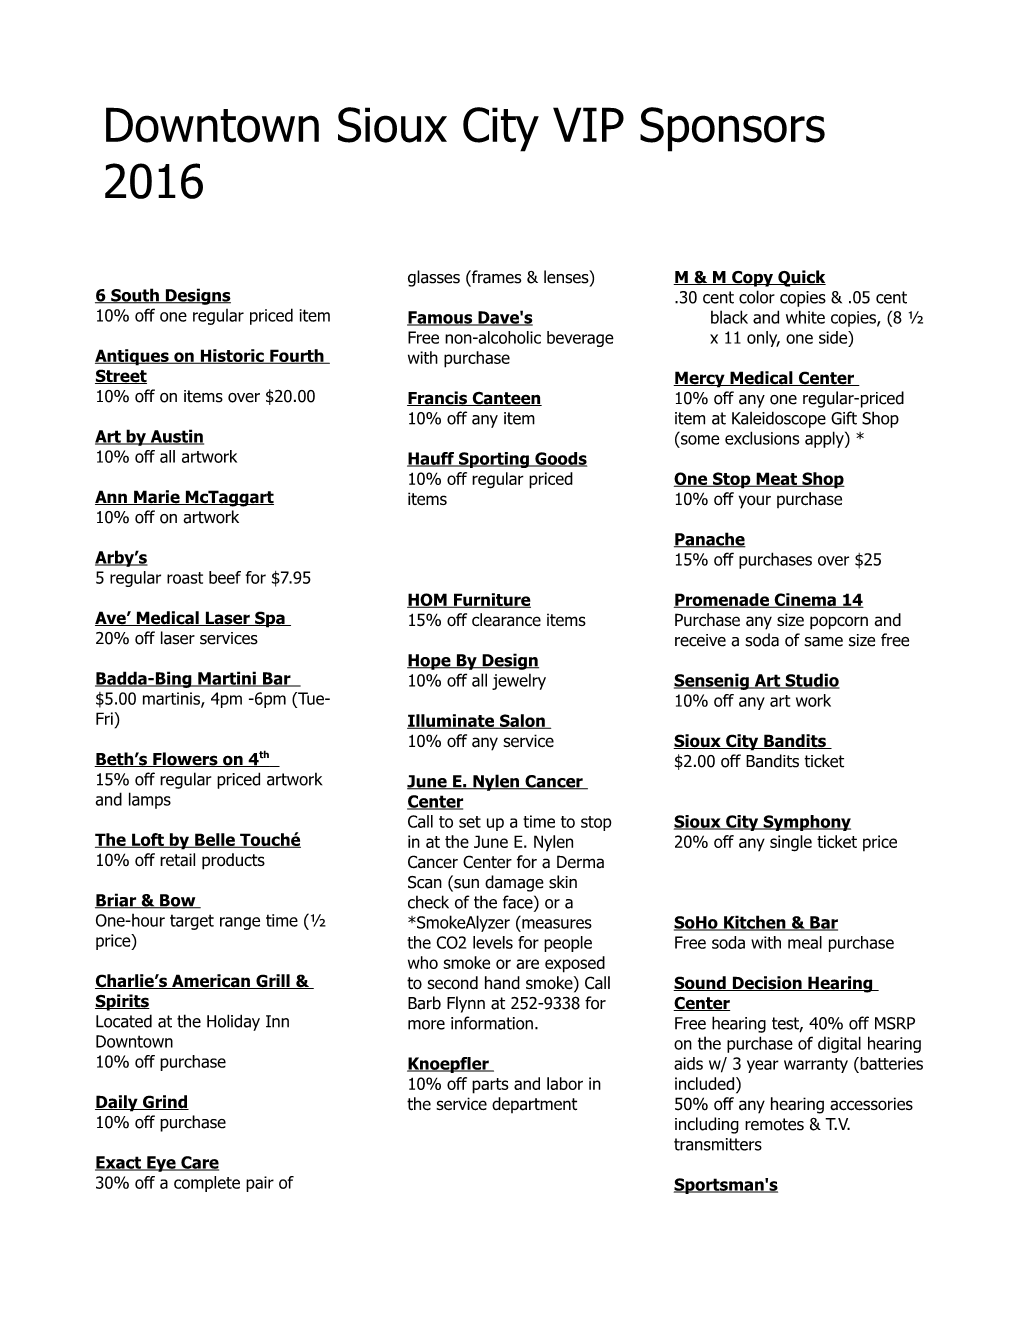 Downtown Sioux City VIP Sponsors 2016